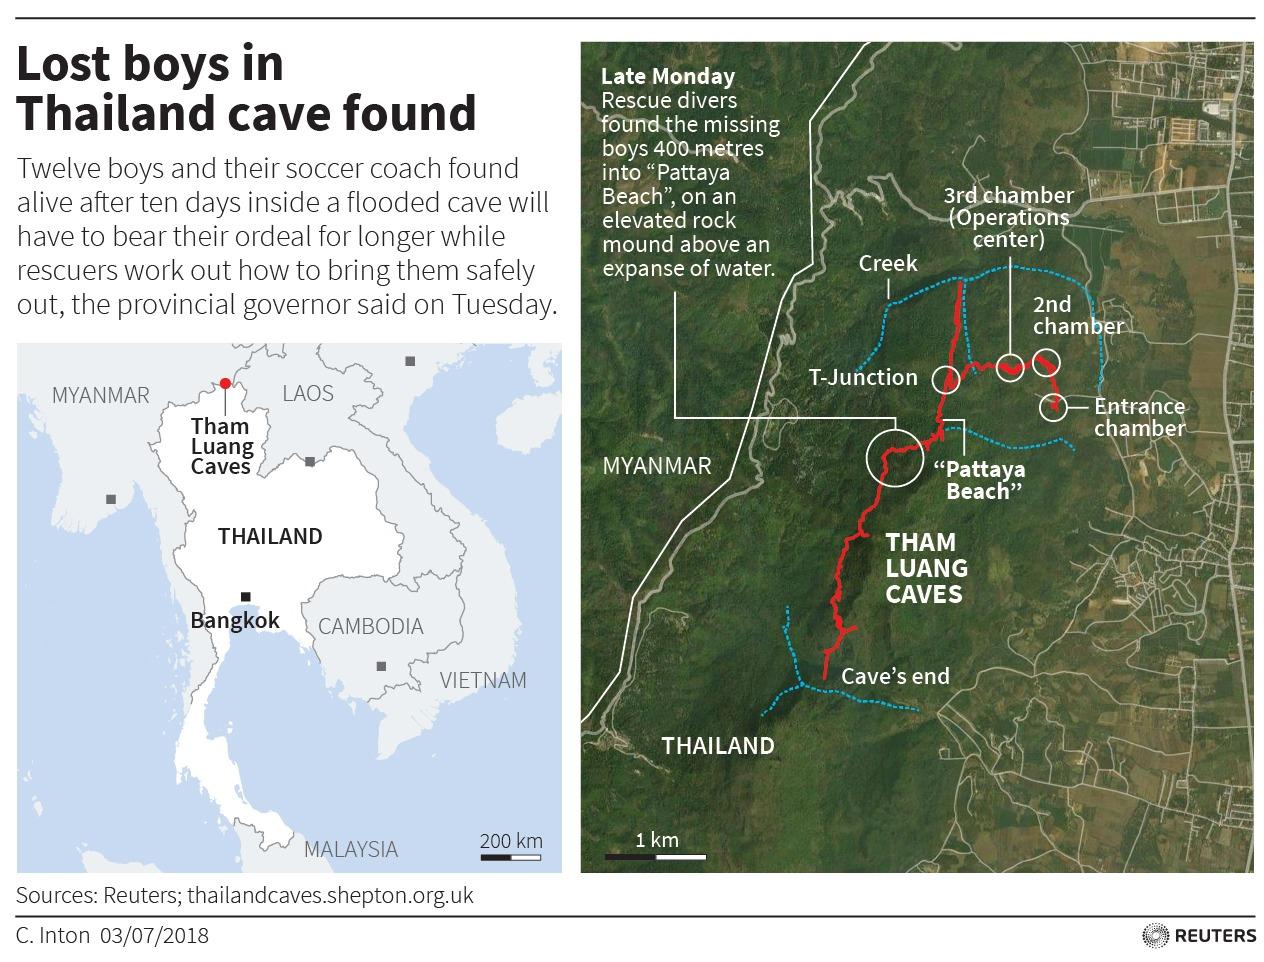 A map of the Thailand cave and rescue operation.